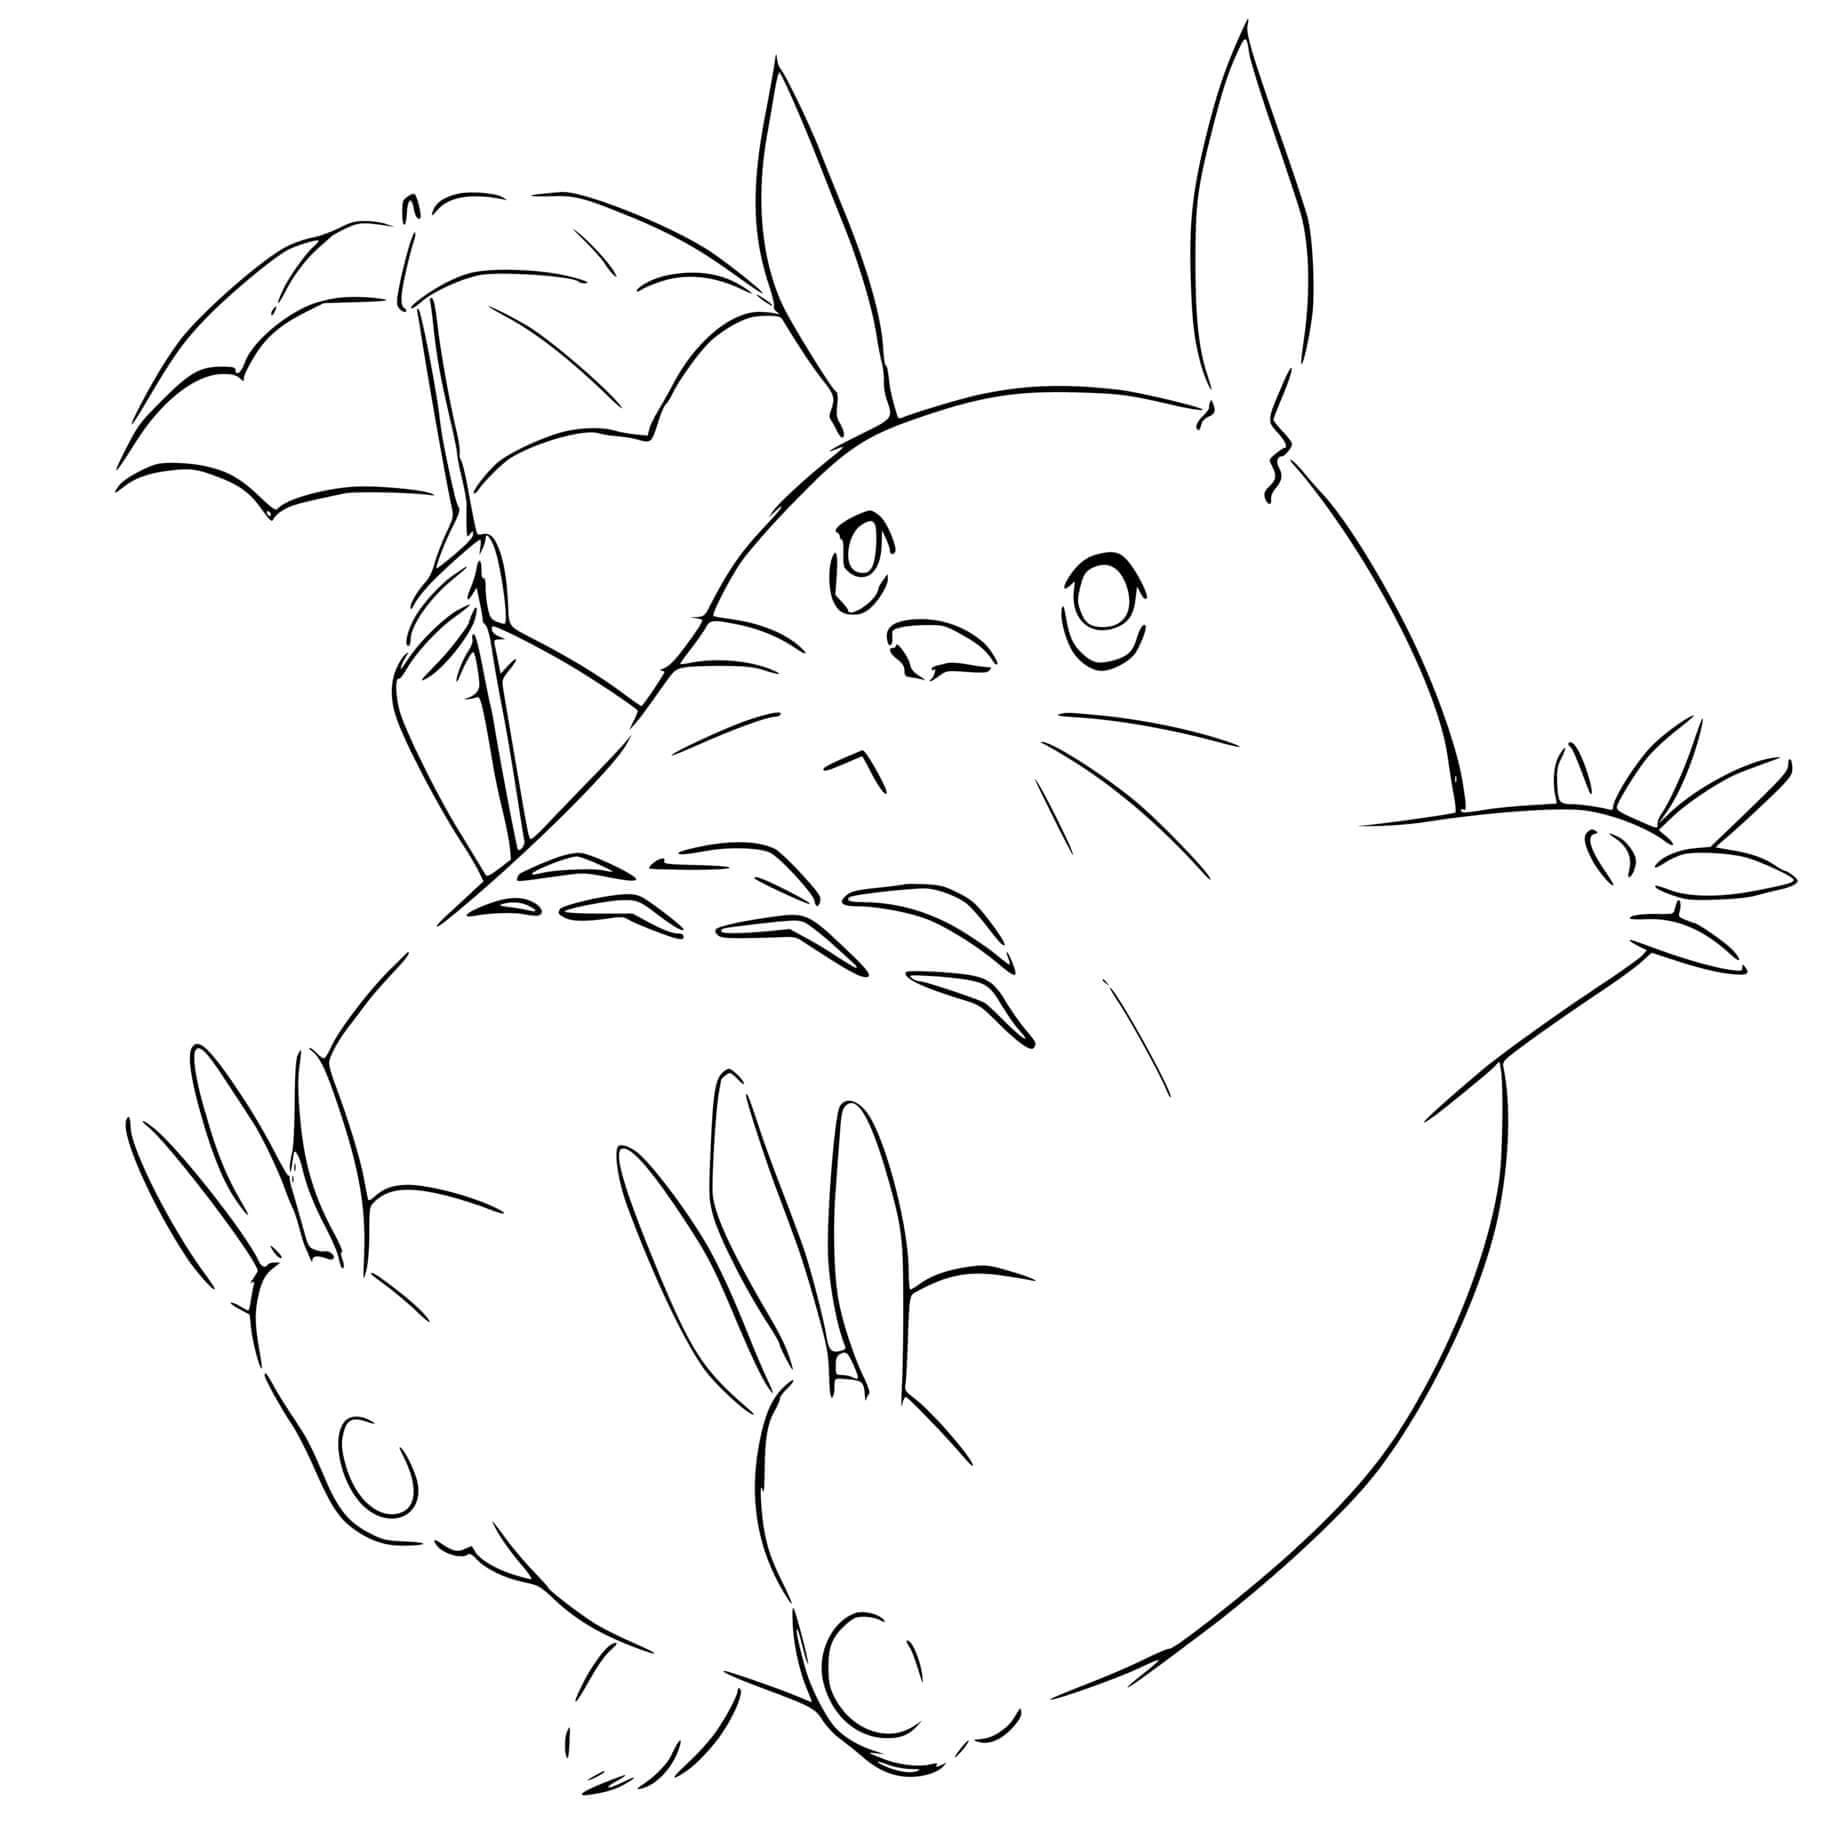 Totoro 24 Mj sasiad Totoro coloring page to print and coloring